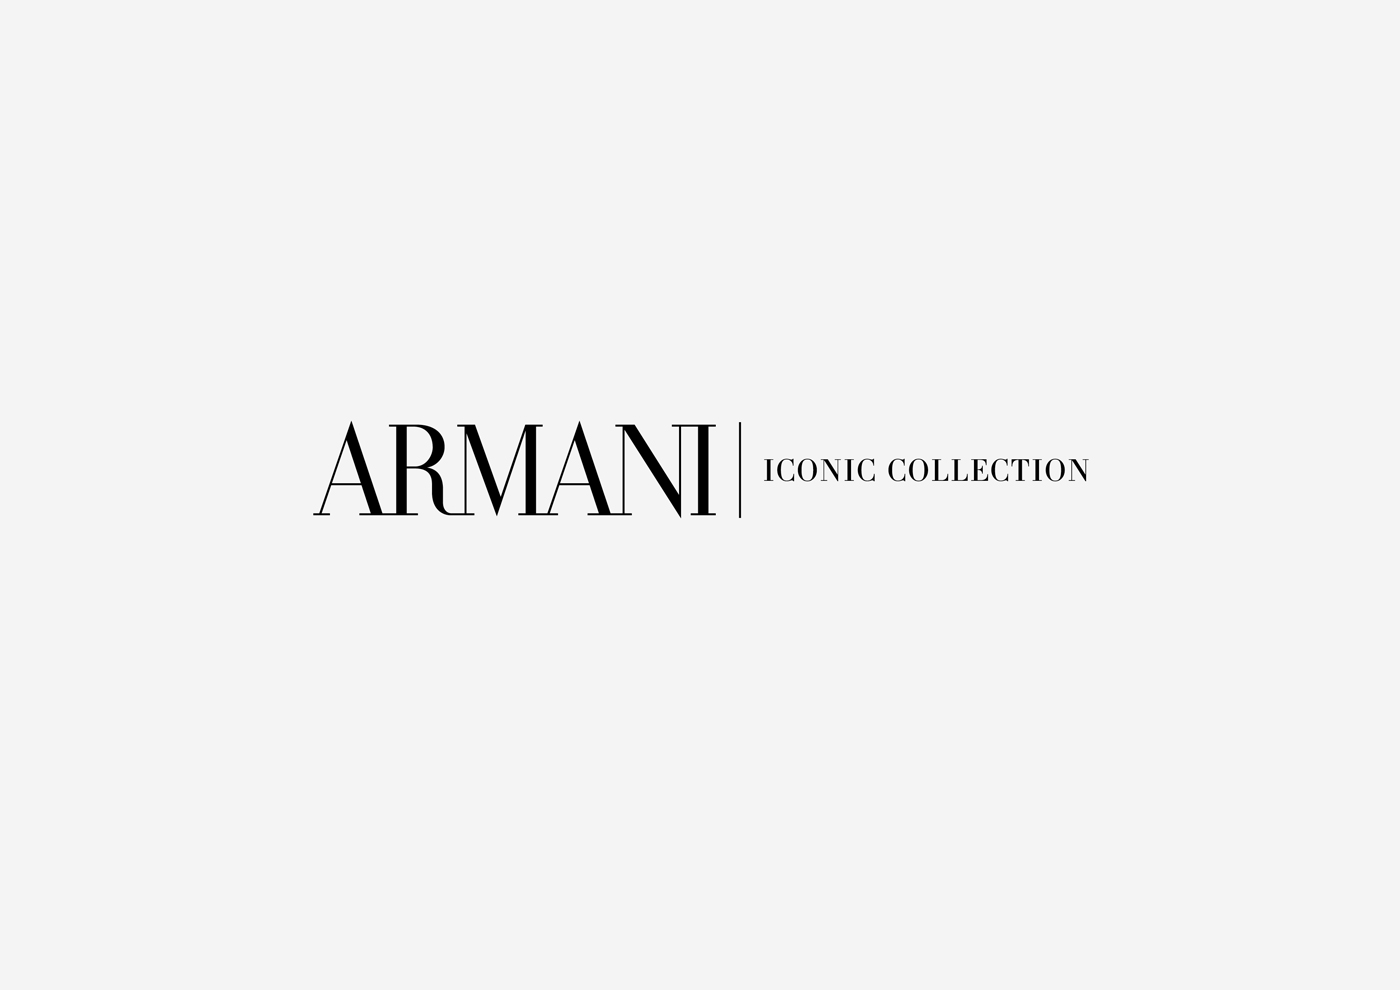 Armani – Iconic Collection (proposal)